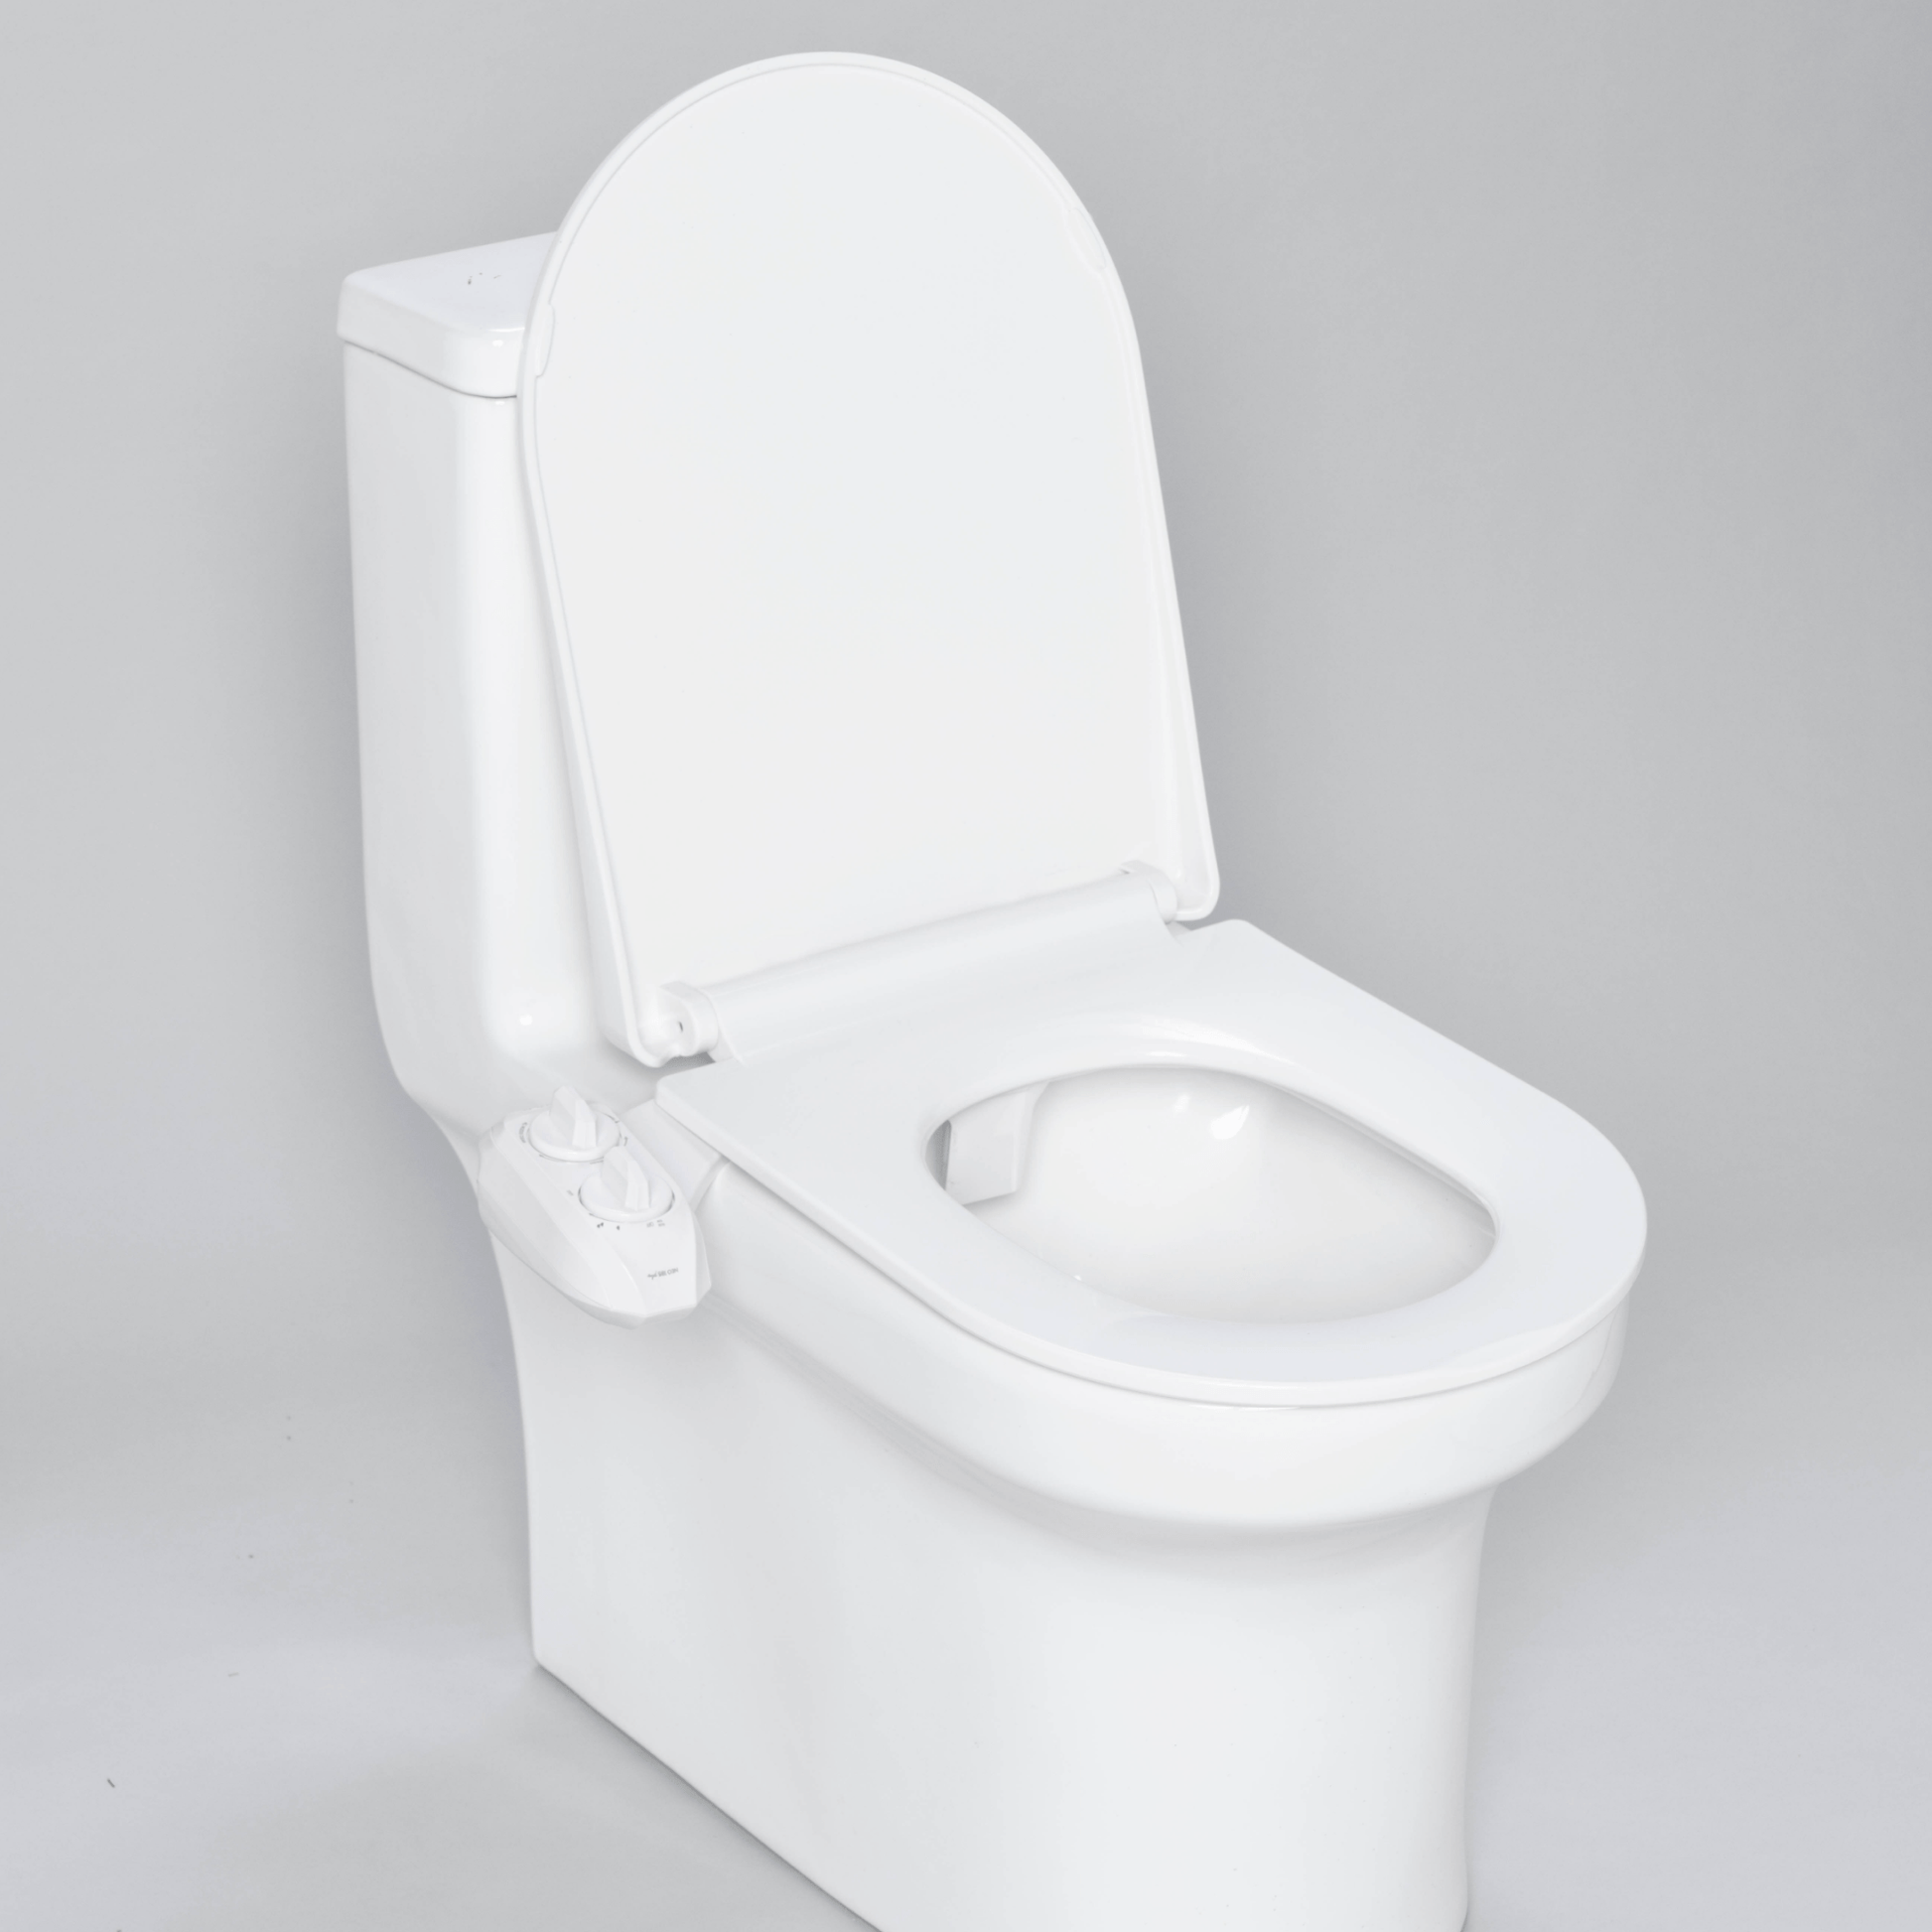 NEO 185 Plus White installed on a modern toilet, with lid open